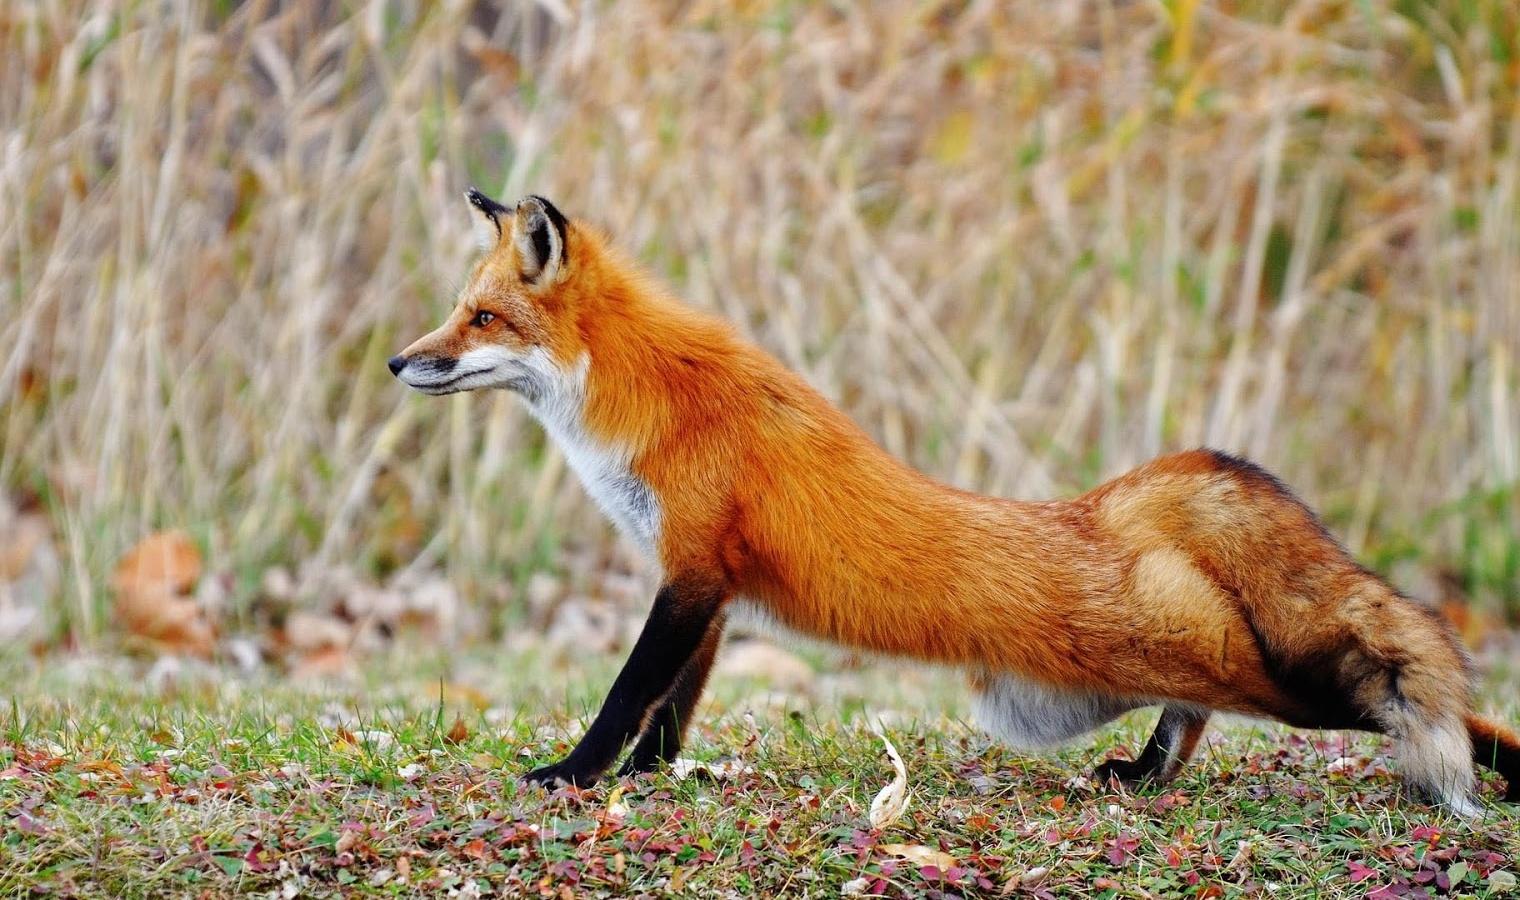 Perfect Red Fox Habitat Picture. Quality Image on Animal Picture